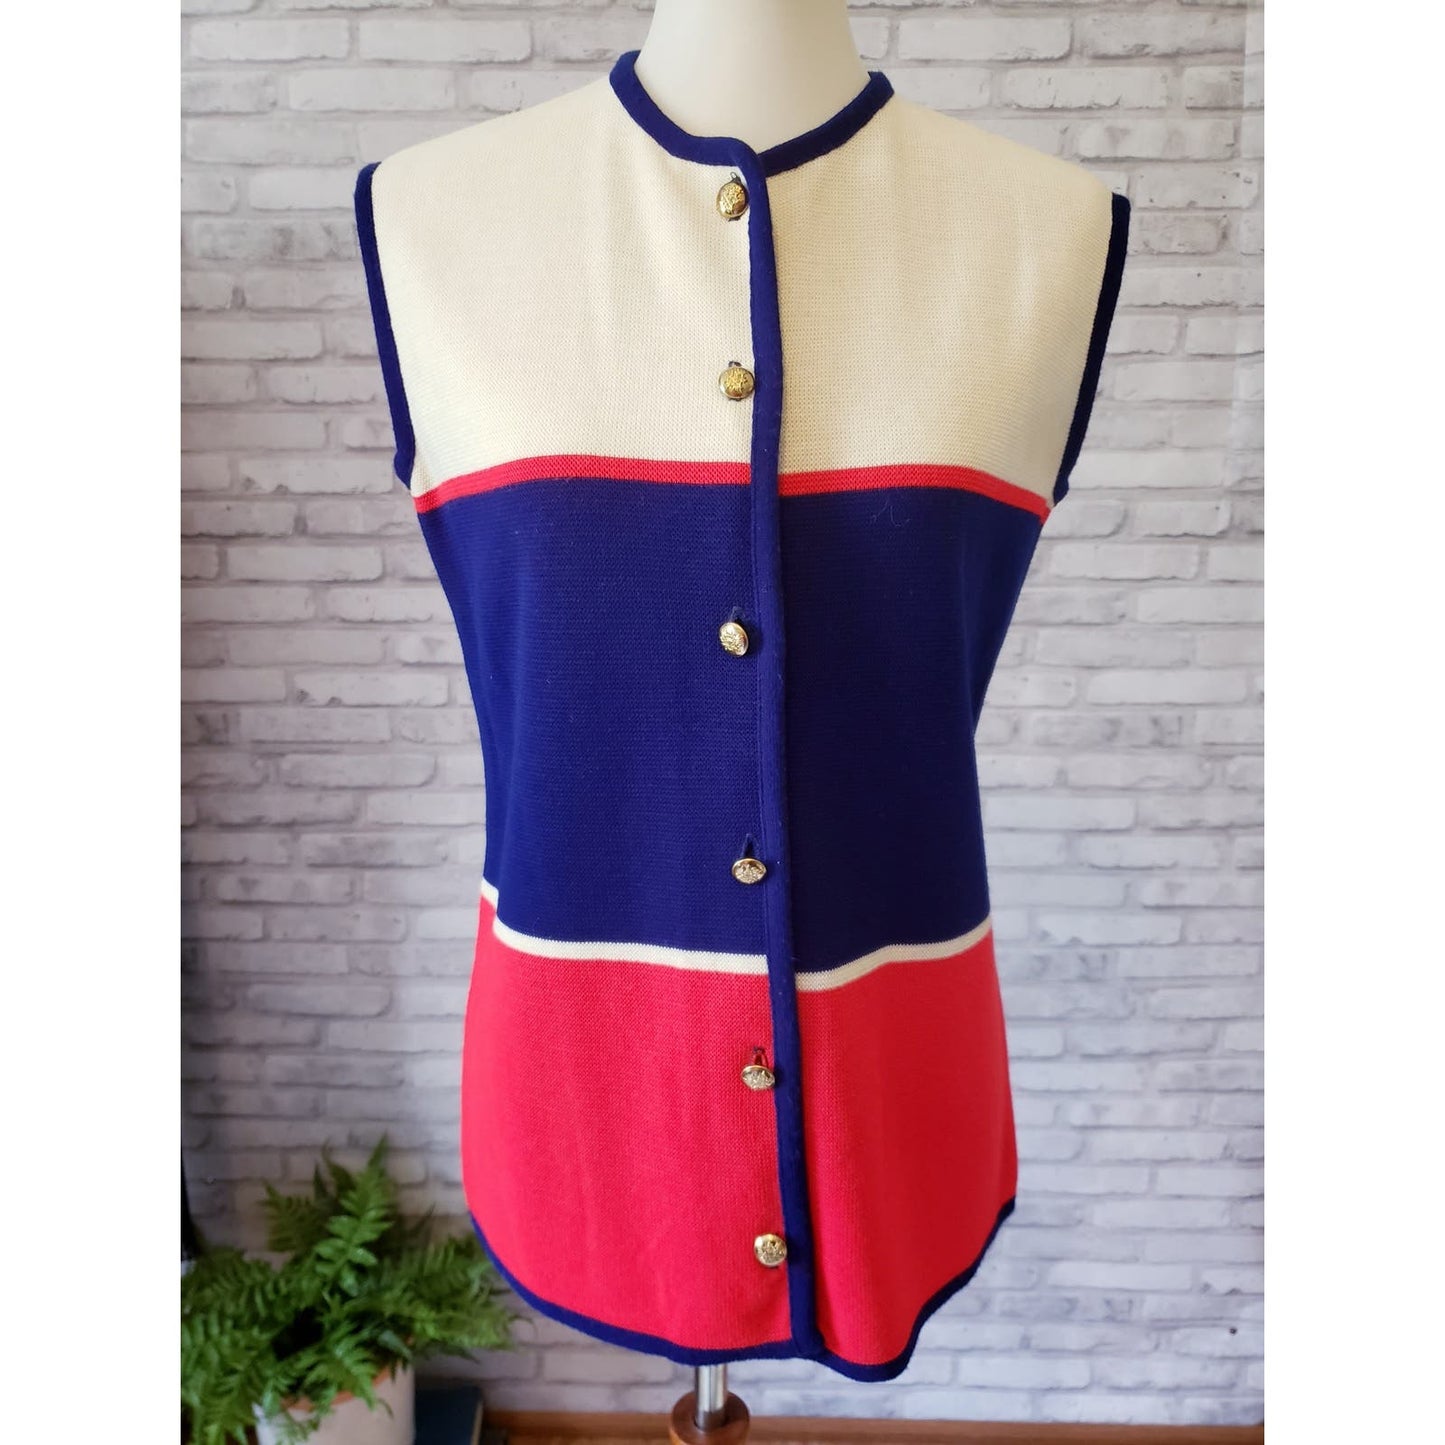 Vintage knit vest button front red white and blue colorblock, 38 bust, 1970s patriotic retro get out the vote